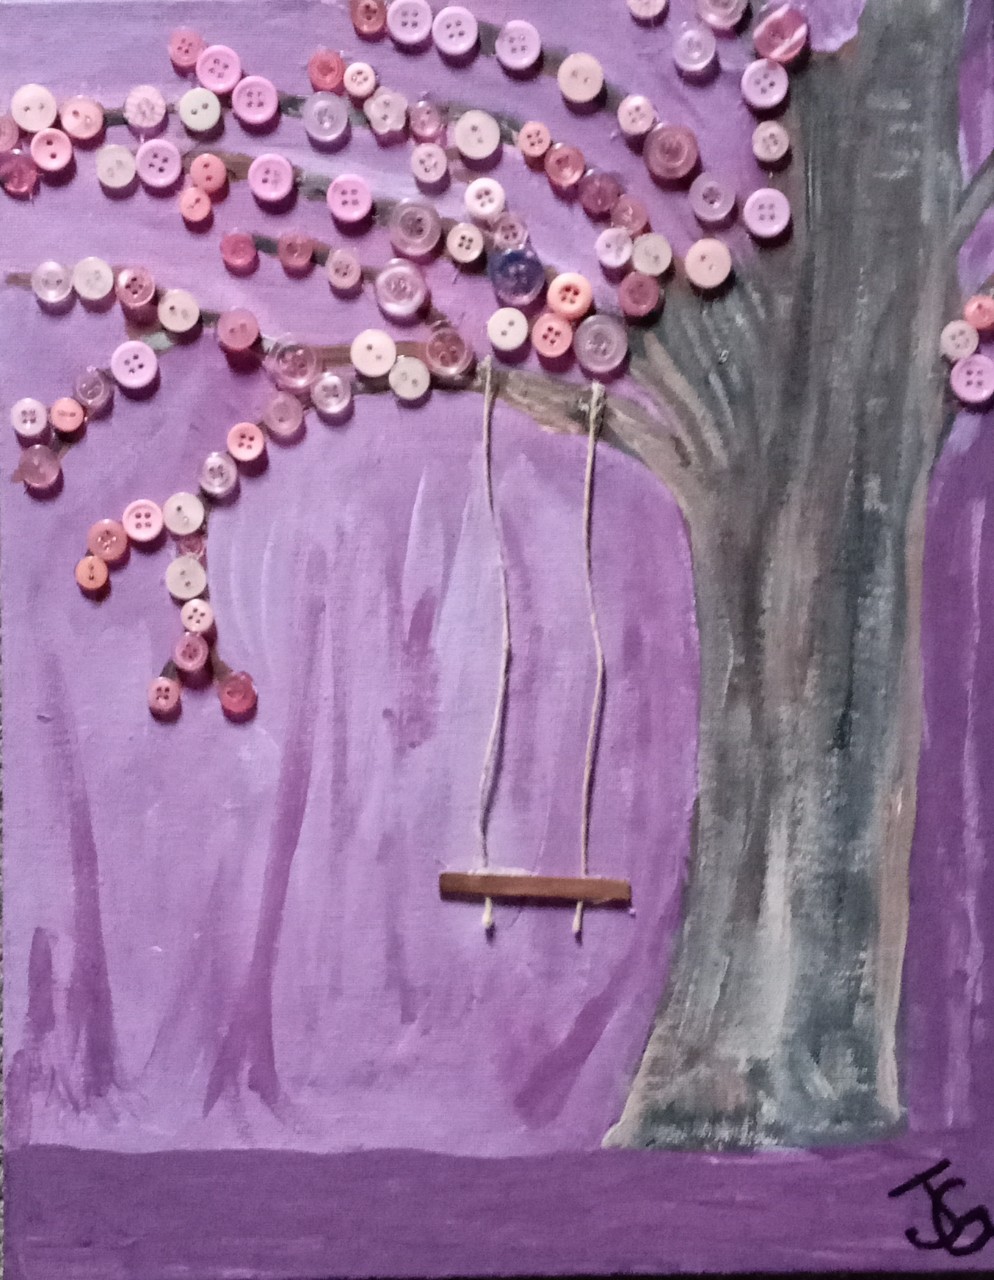 a multimedia painting shows a gray tree on a purple background. Purple buttons are affixed to the tree’s branches to form its leaves. A swing of string and a small piece of wood hangs from the lowest branch. 